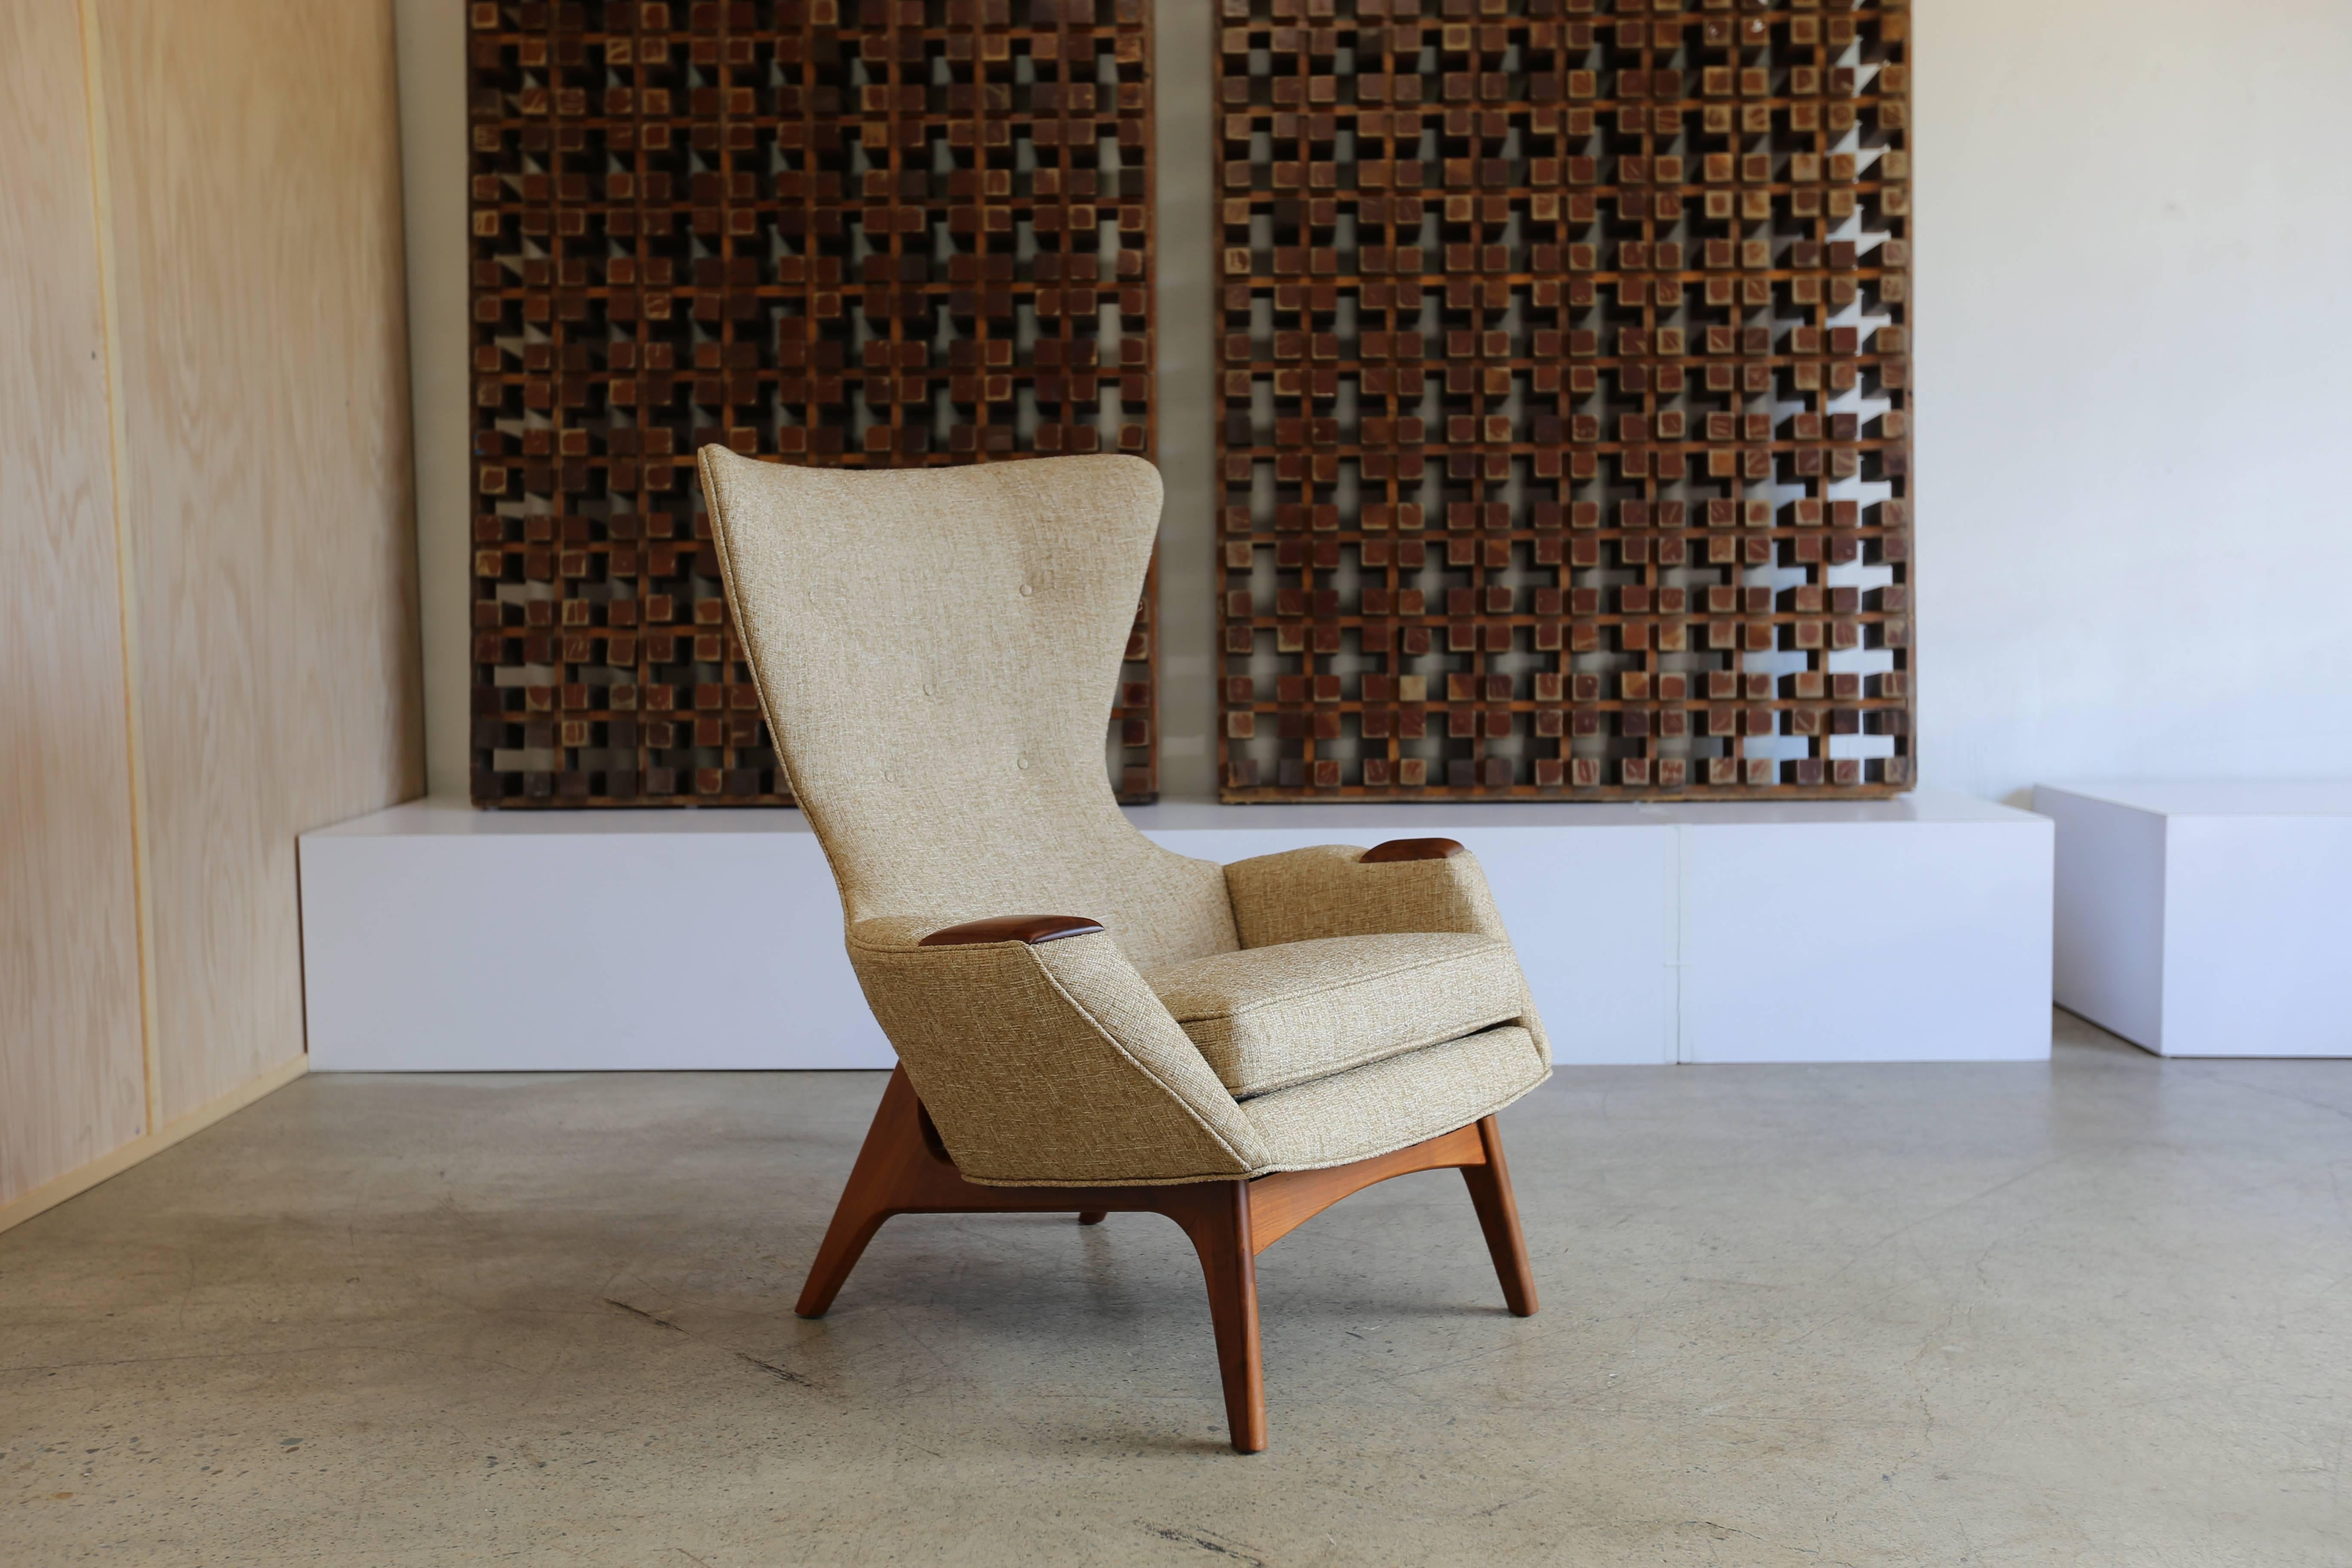 Sculptural wingback chair by Adrian Pearsall for Craft Associates.